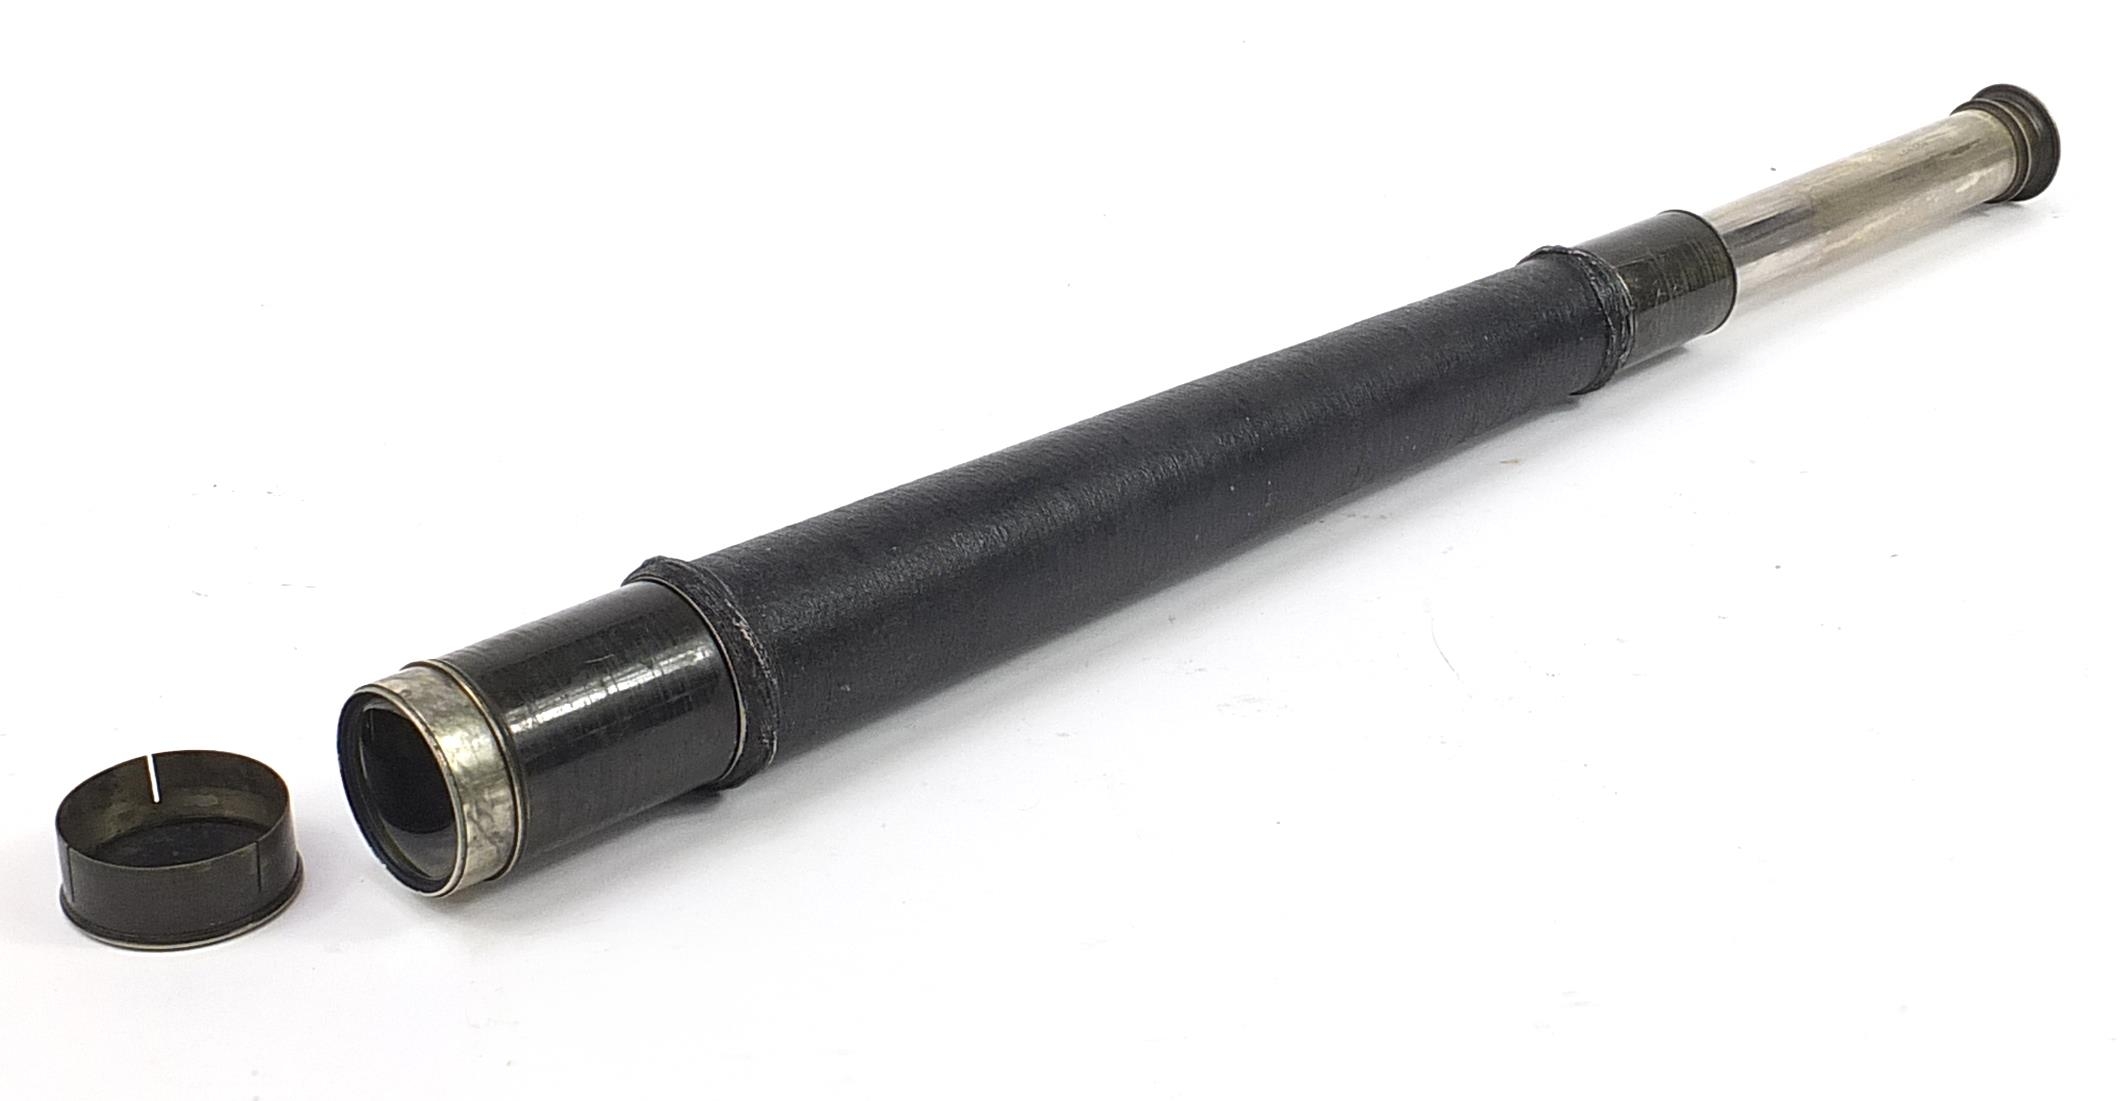 Kelvin & James White Ltd and Hutton, military interest two draw telescope, 50cm in length - Image 2 of 4